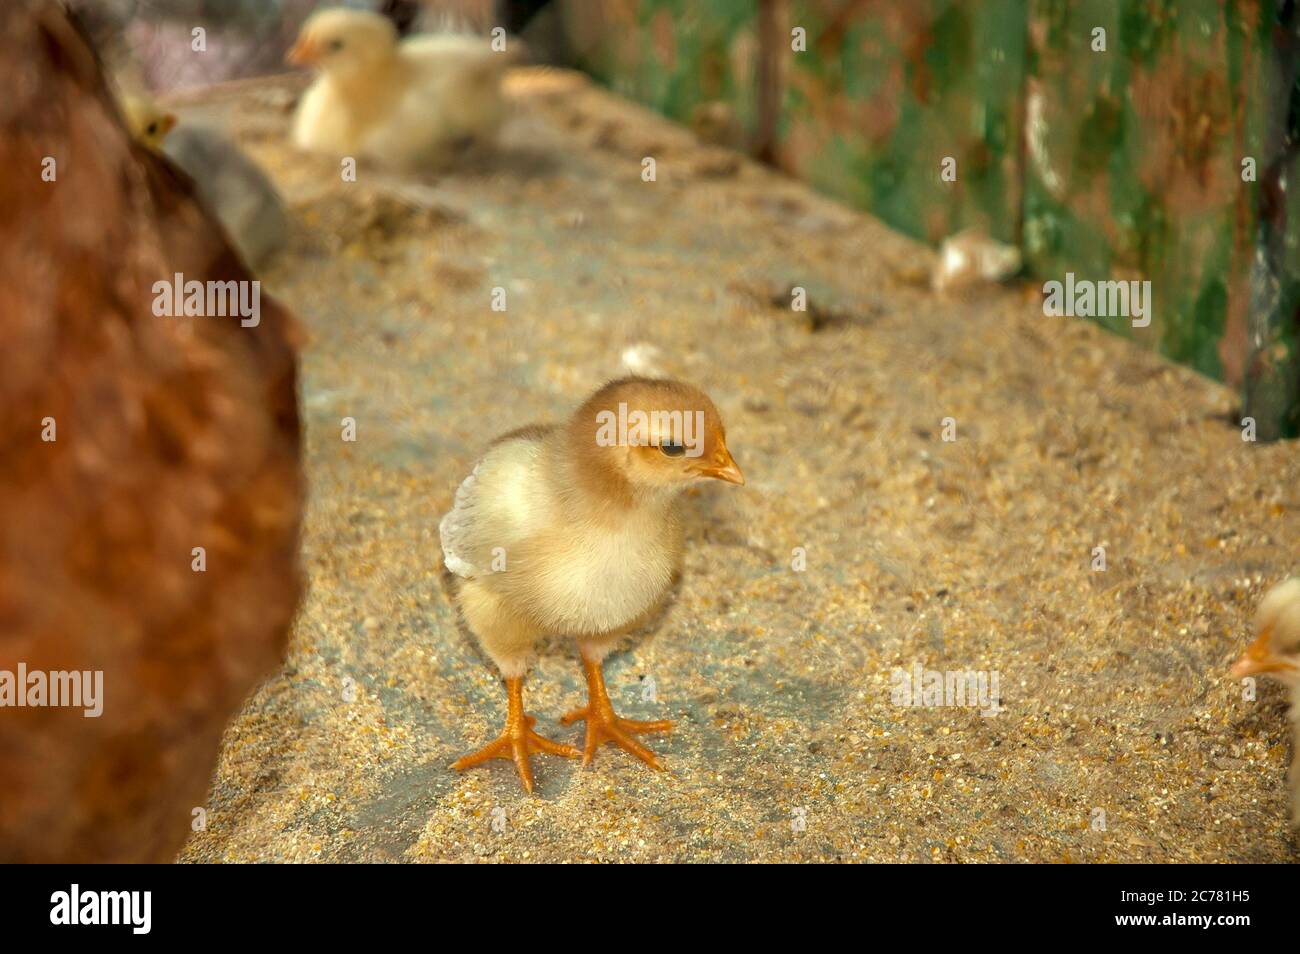 A little yellow chicken in a cage on a farm, soft focus Stock Photo